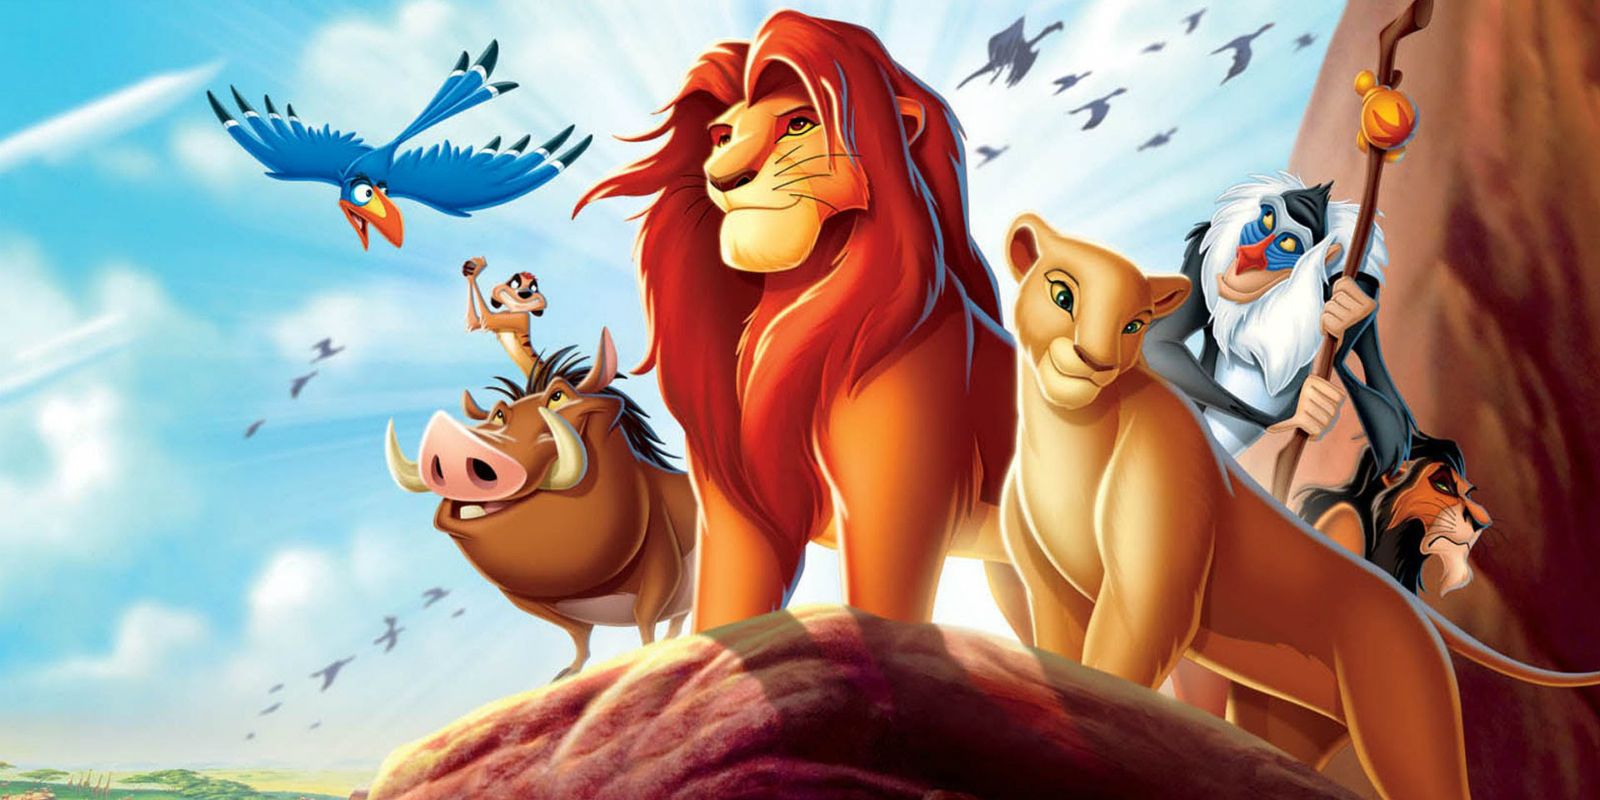 Main characters from Disney's The Lion King.